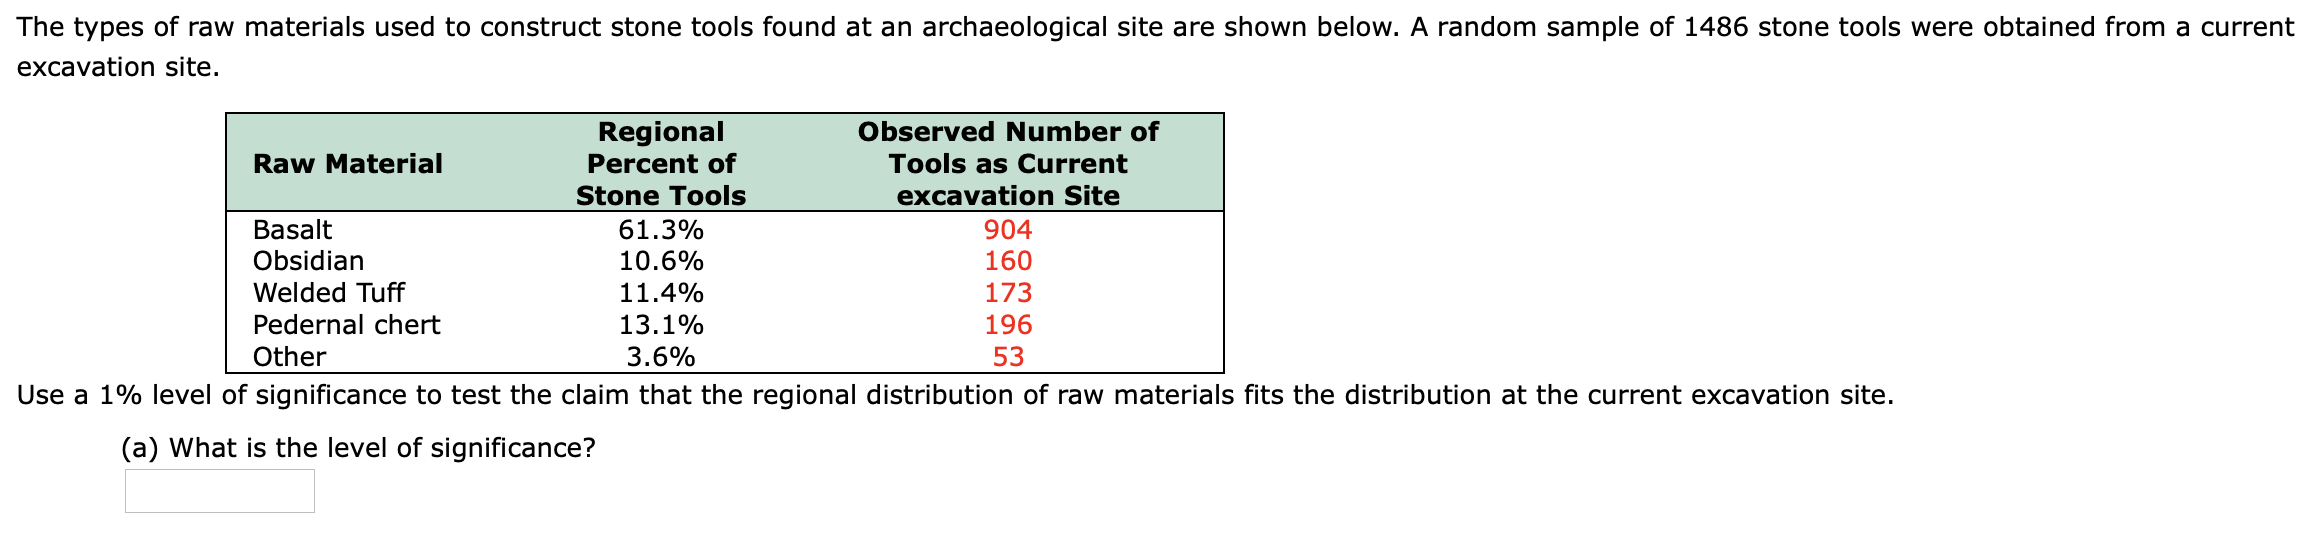 The types of raw materials used to construct stone tools found at an archaeological site are shown below. A random sample of 1486 stone tools were obtained from a current
excavation site.
Regional
Percent of
Stone Tools
61.3%
10.6%
11.4%
13.1%
Observed Number of
Tools as Current
excavation Site
Raw Material
160
173
196
53
Use a 1% level of significance to test the claim that the regional distribution of raw materials fits the distribution at the current excavation site.
Basalt
Obsidian
Welded Tuff
Pedernal chert
Other
904
3.6%
(a) What is the level of significance?
